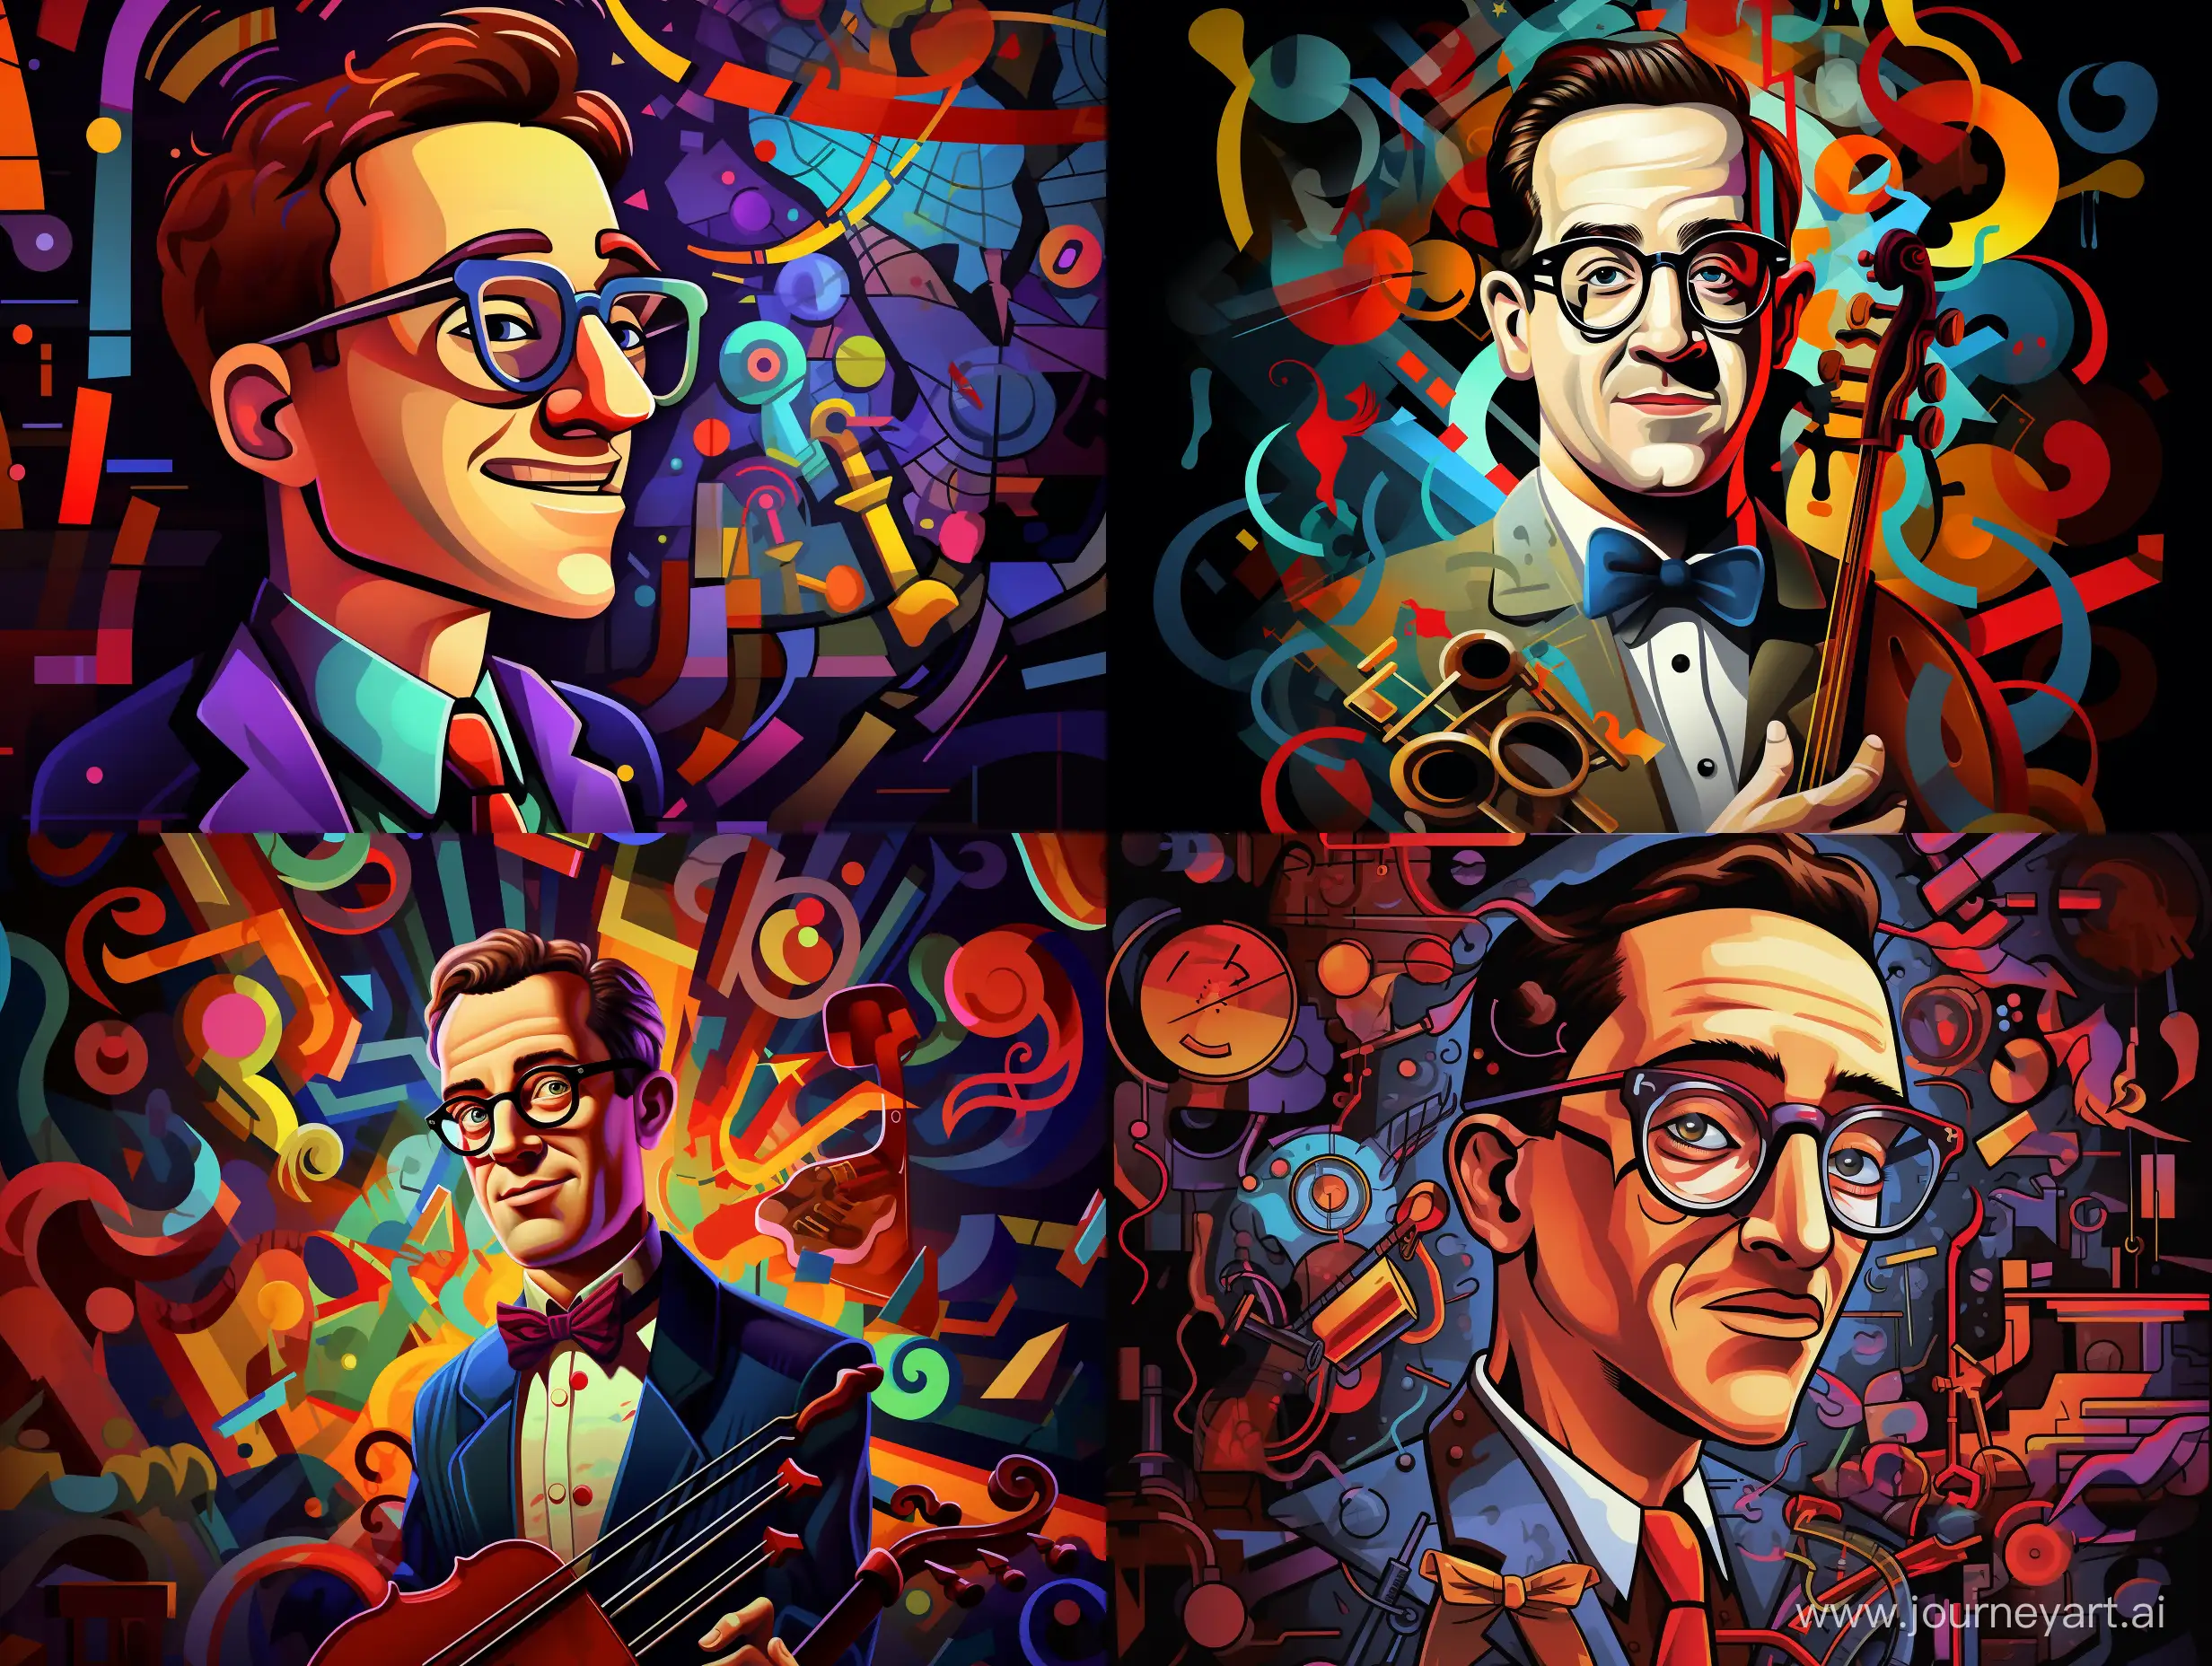 Portrait of Benny Goodman, wearing glasses, in a thin metal frame, against a background of musical symbols, complex colors, cartoon style, caricature, pop art style